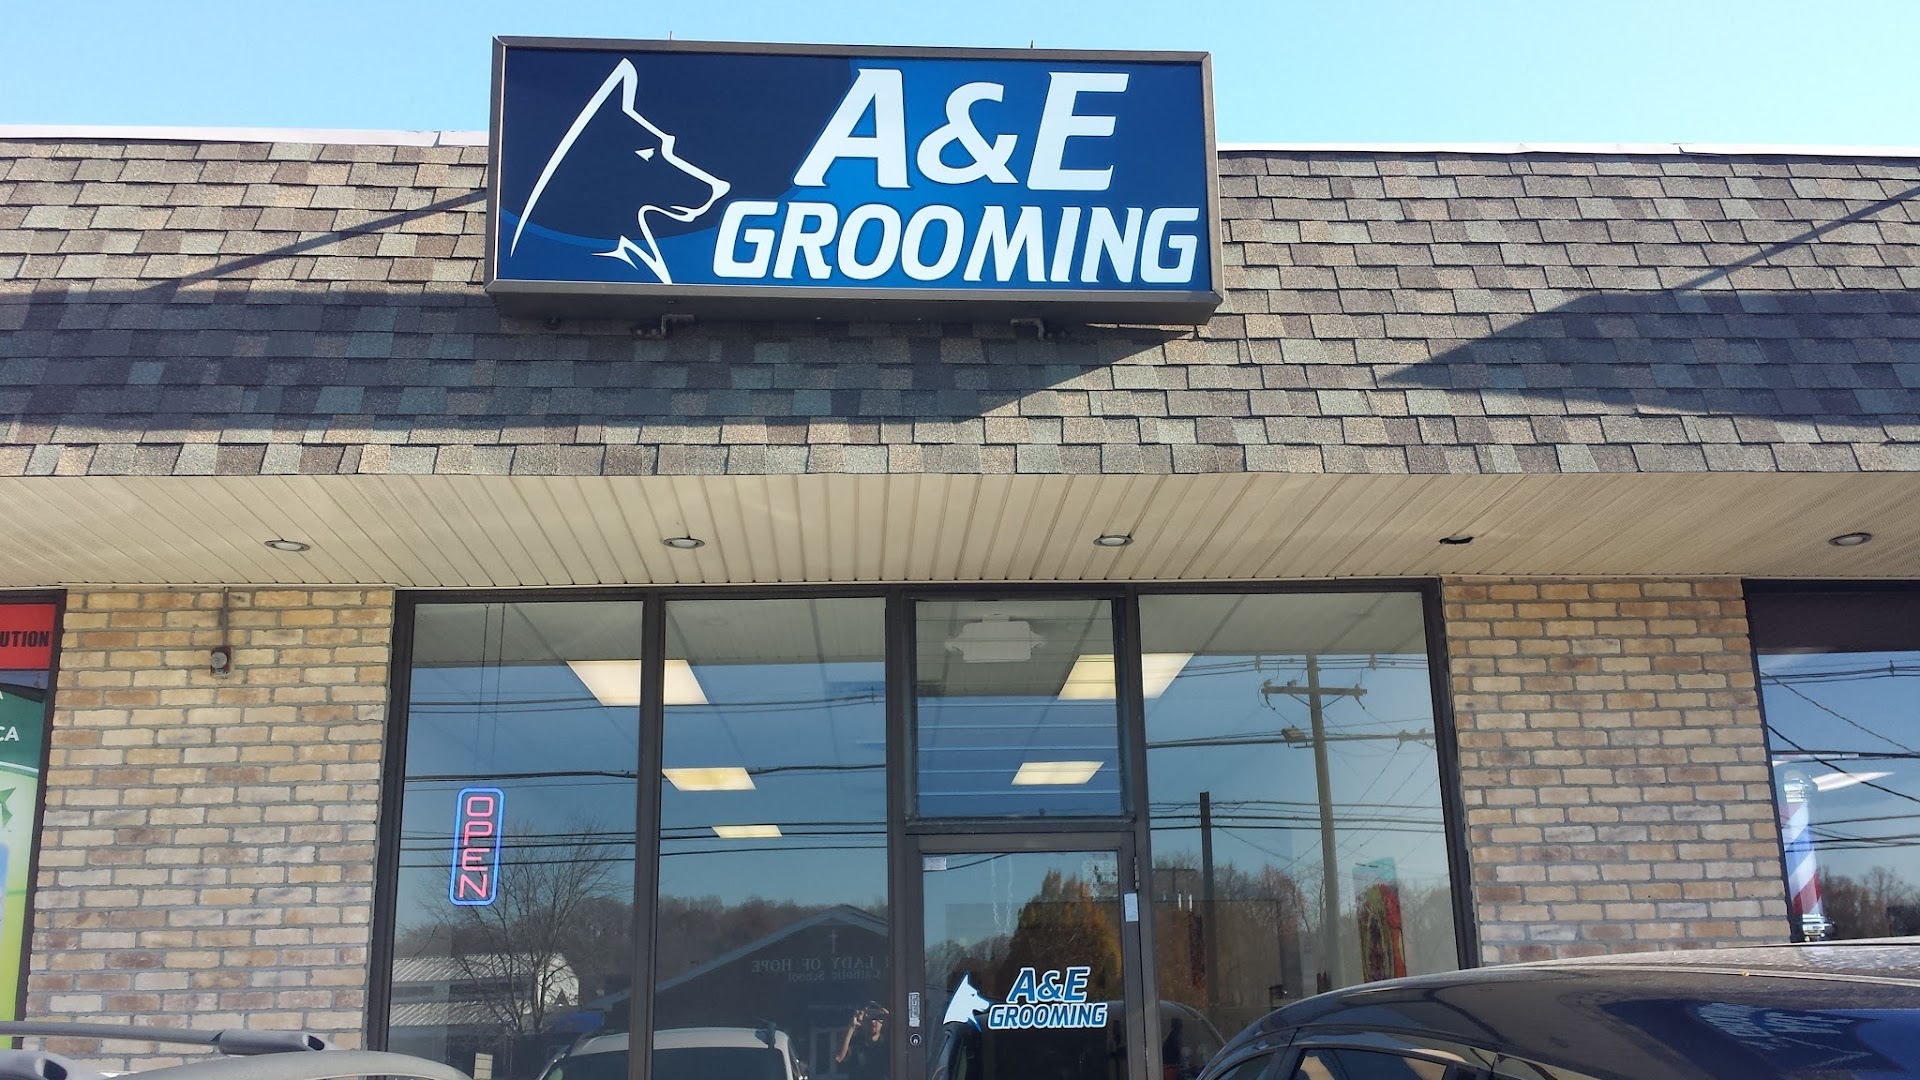 A&E Grooming